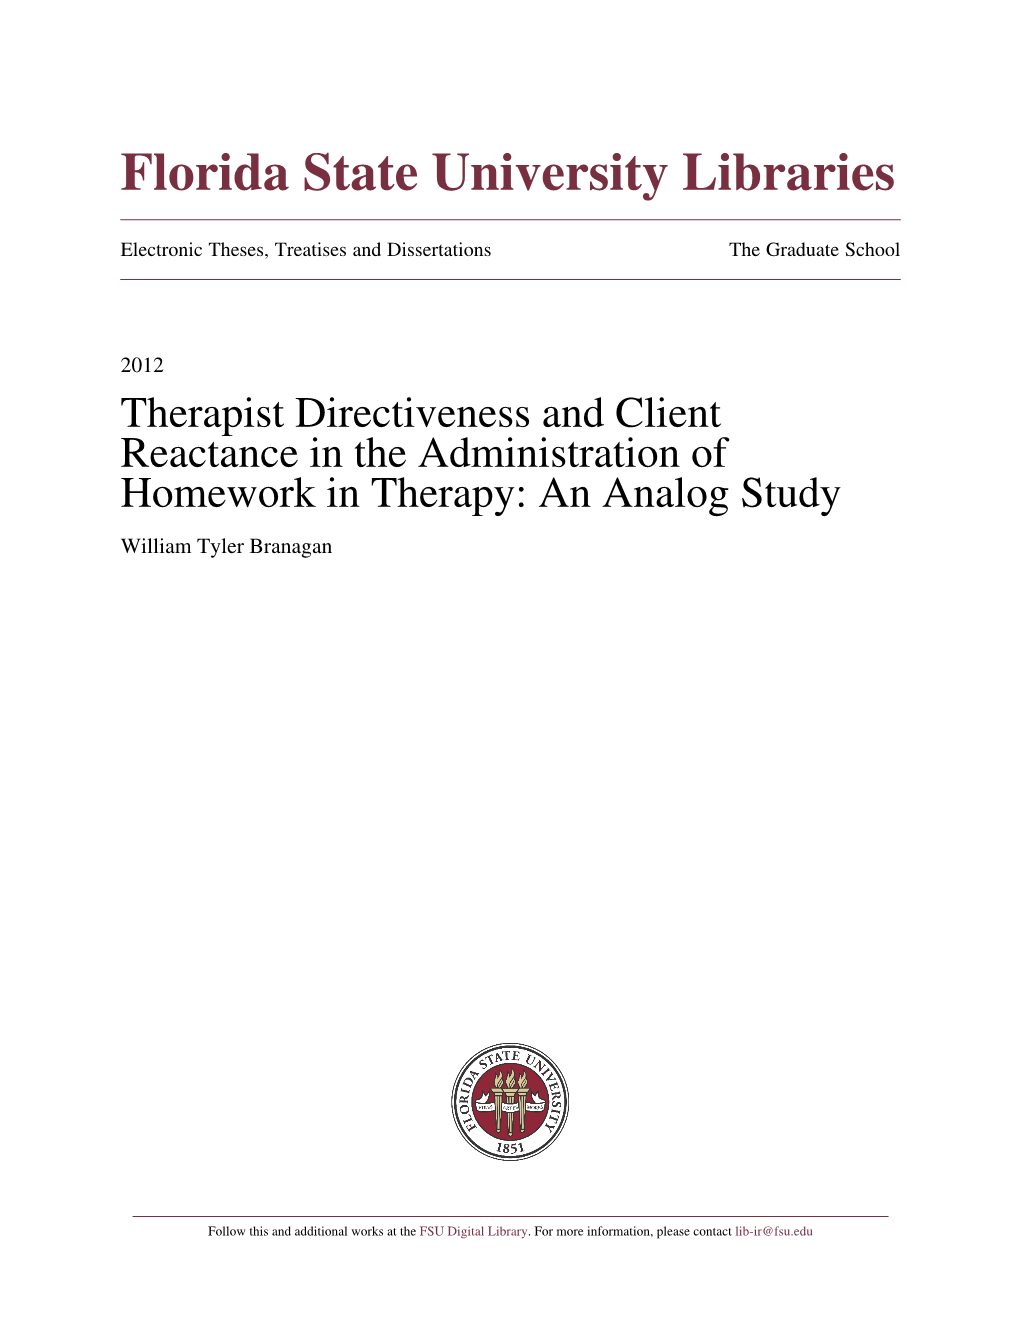 Therapist Directiveness and Client Reactance in the Administration of Homework in Therapy: an Analog Study William Tyler Branagan